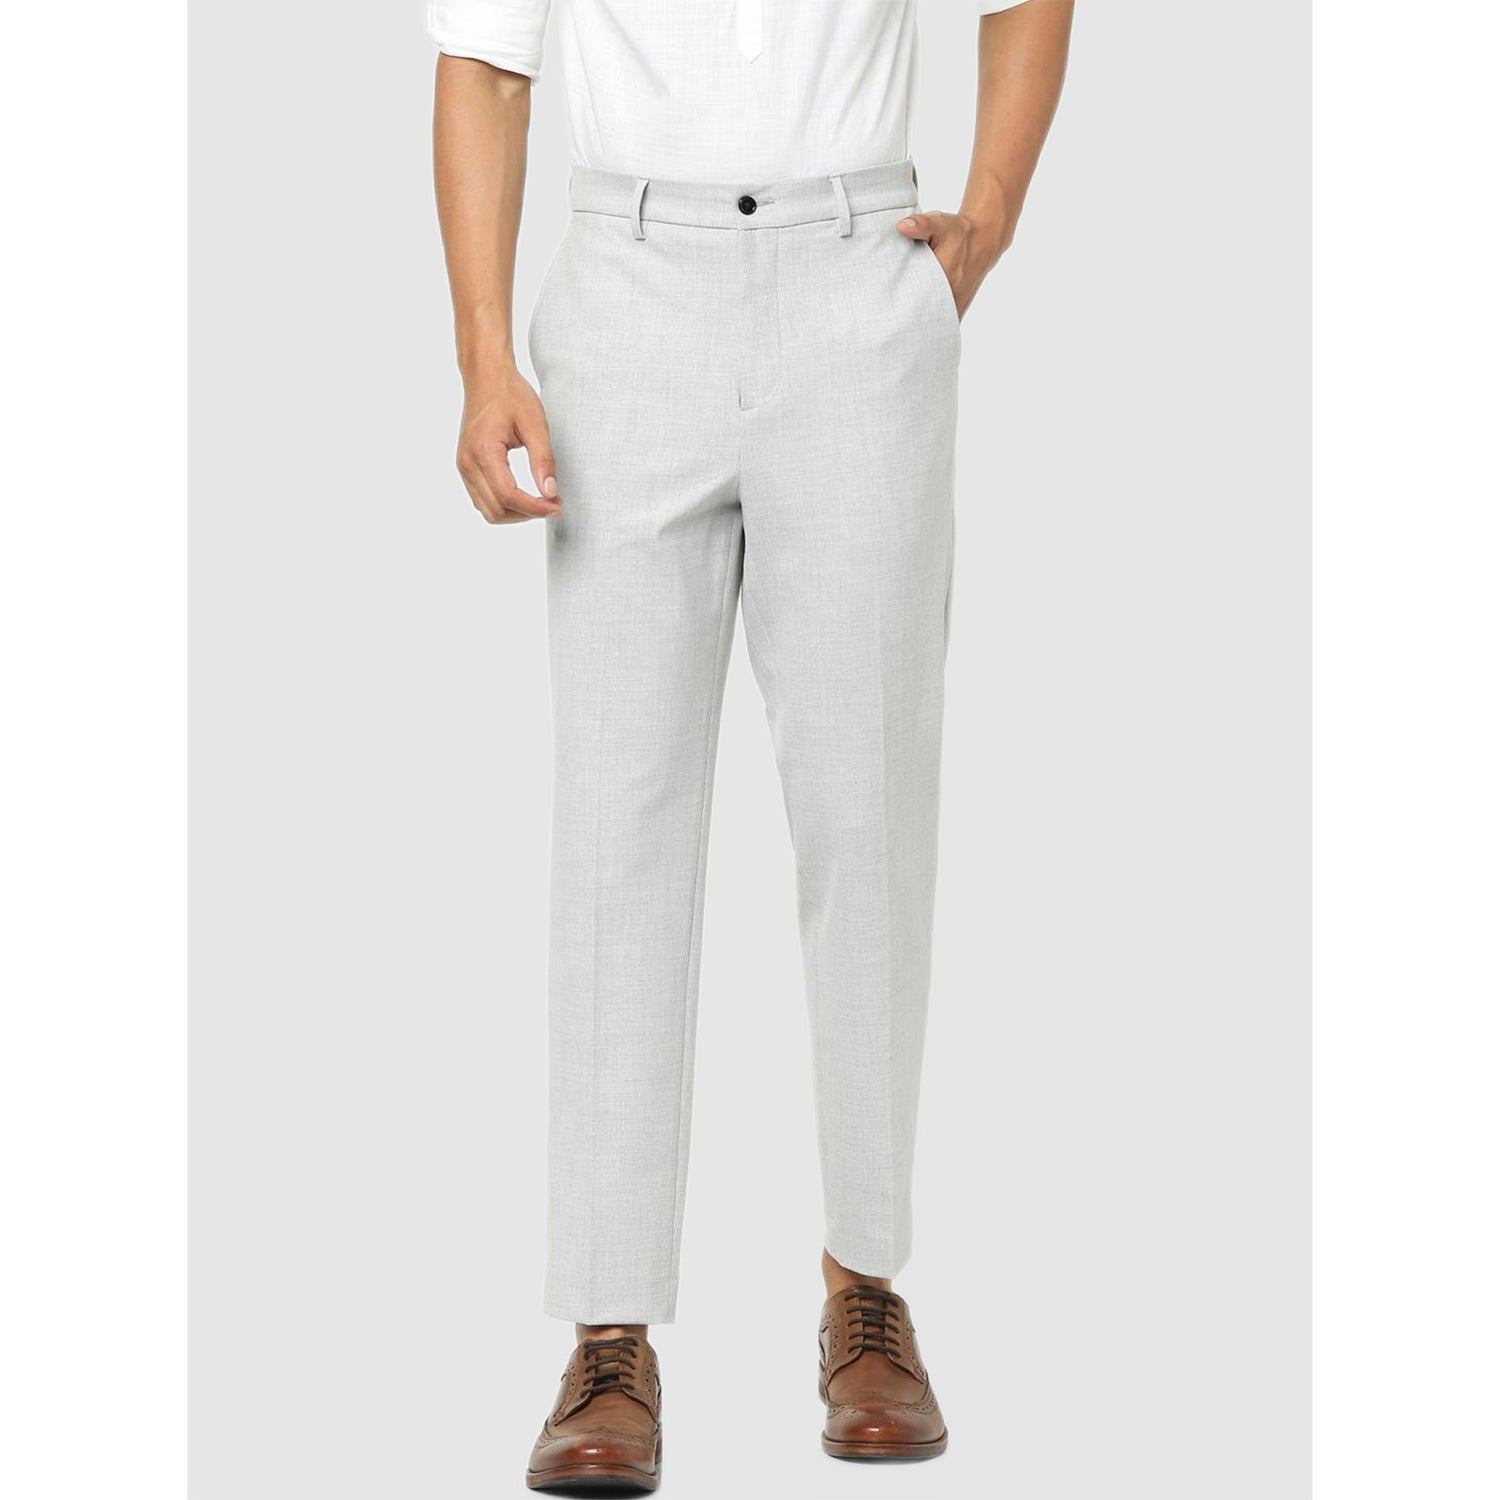 Off White Regular Fit Solid Trousers (Various Sizes)